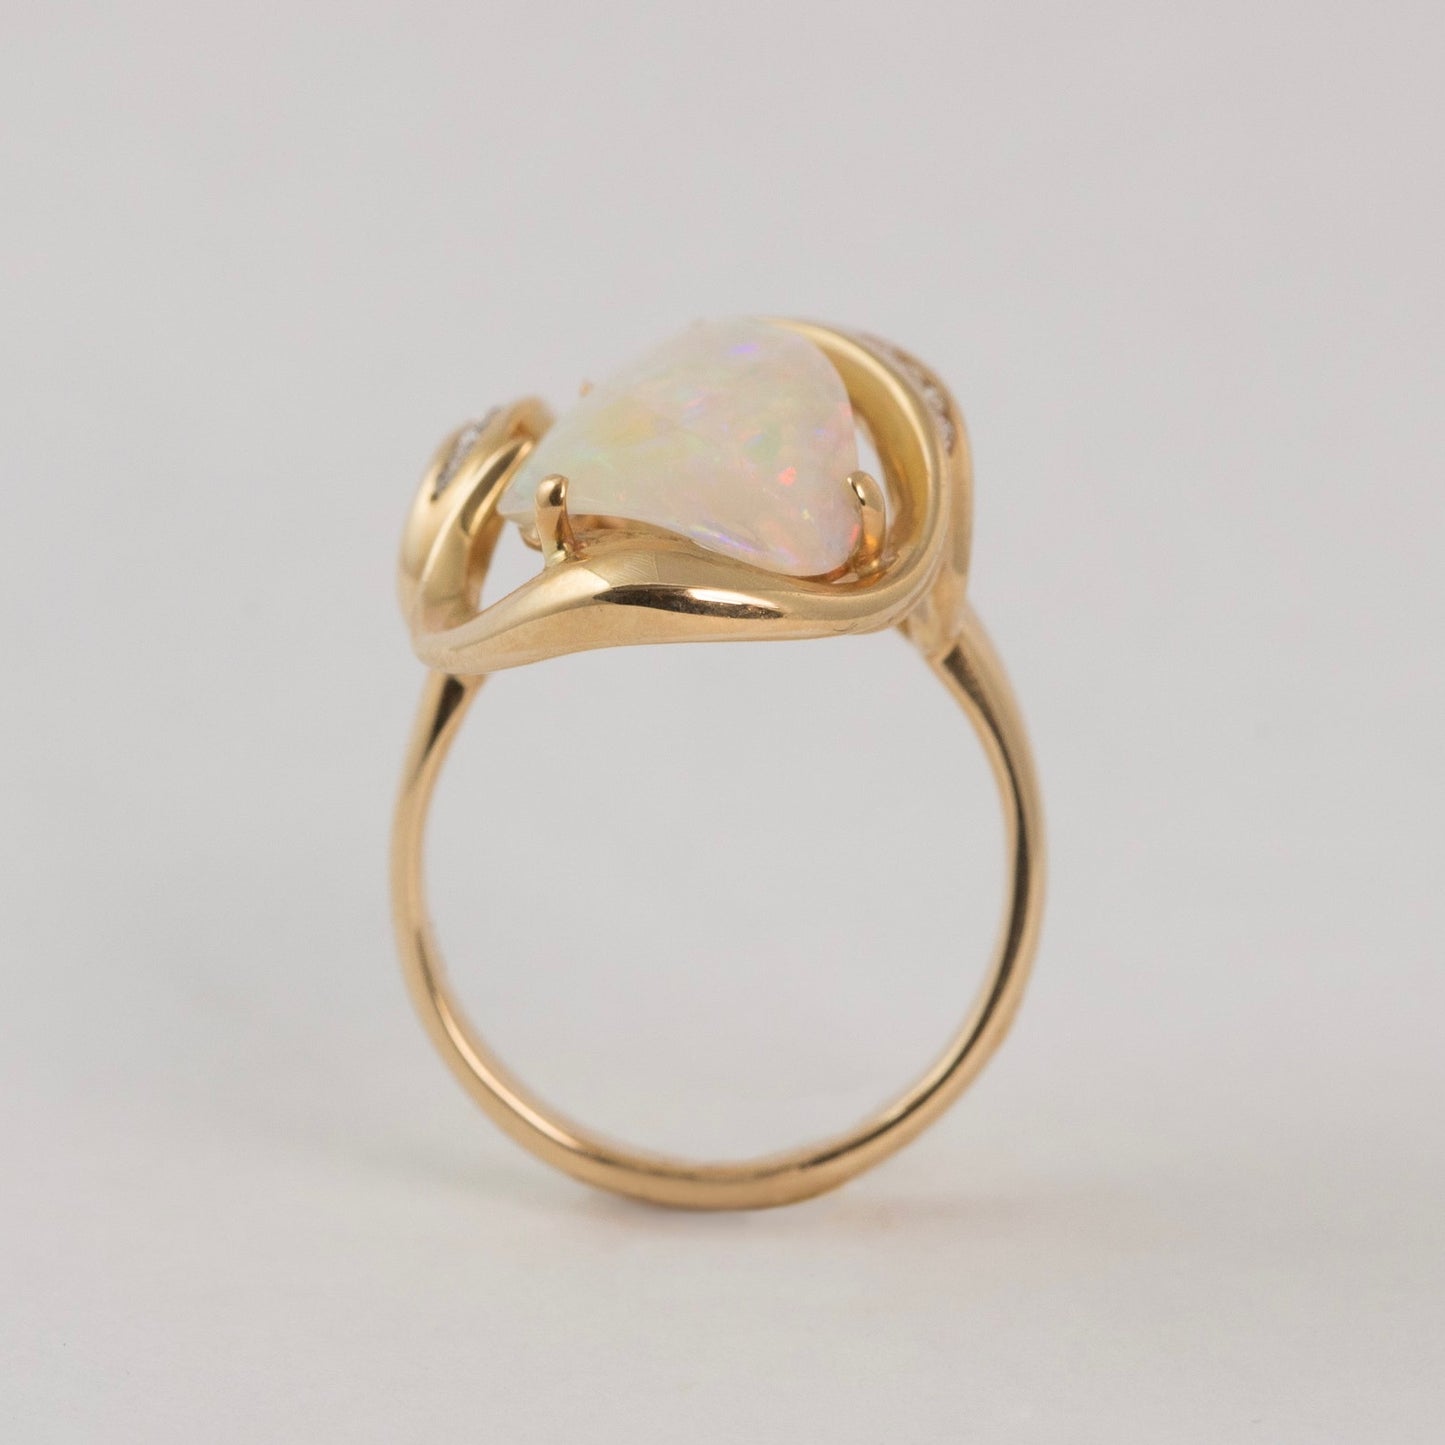 The Abstract Opal Ring